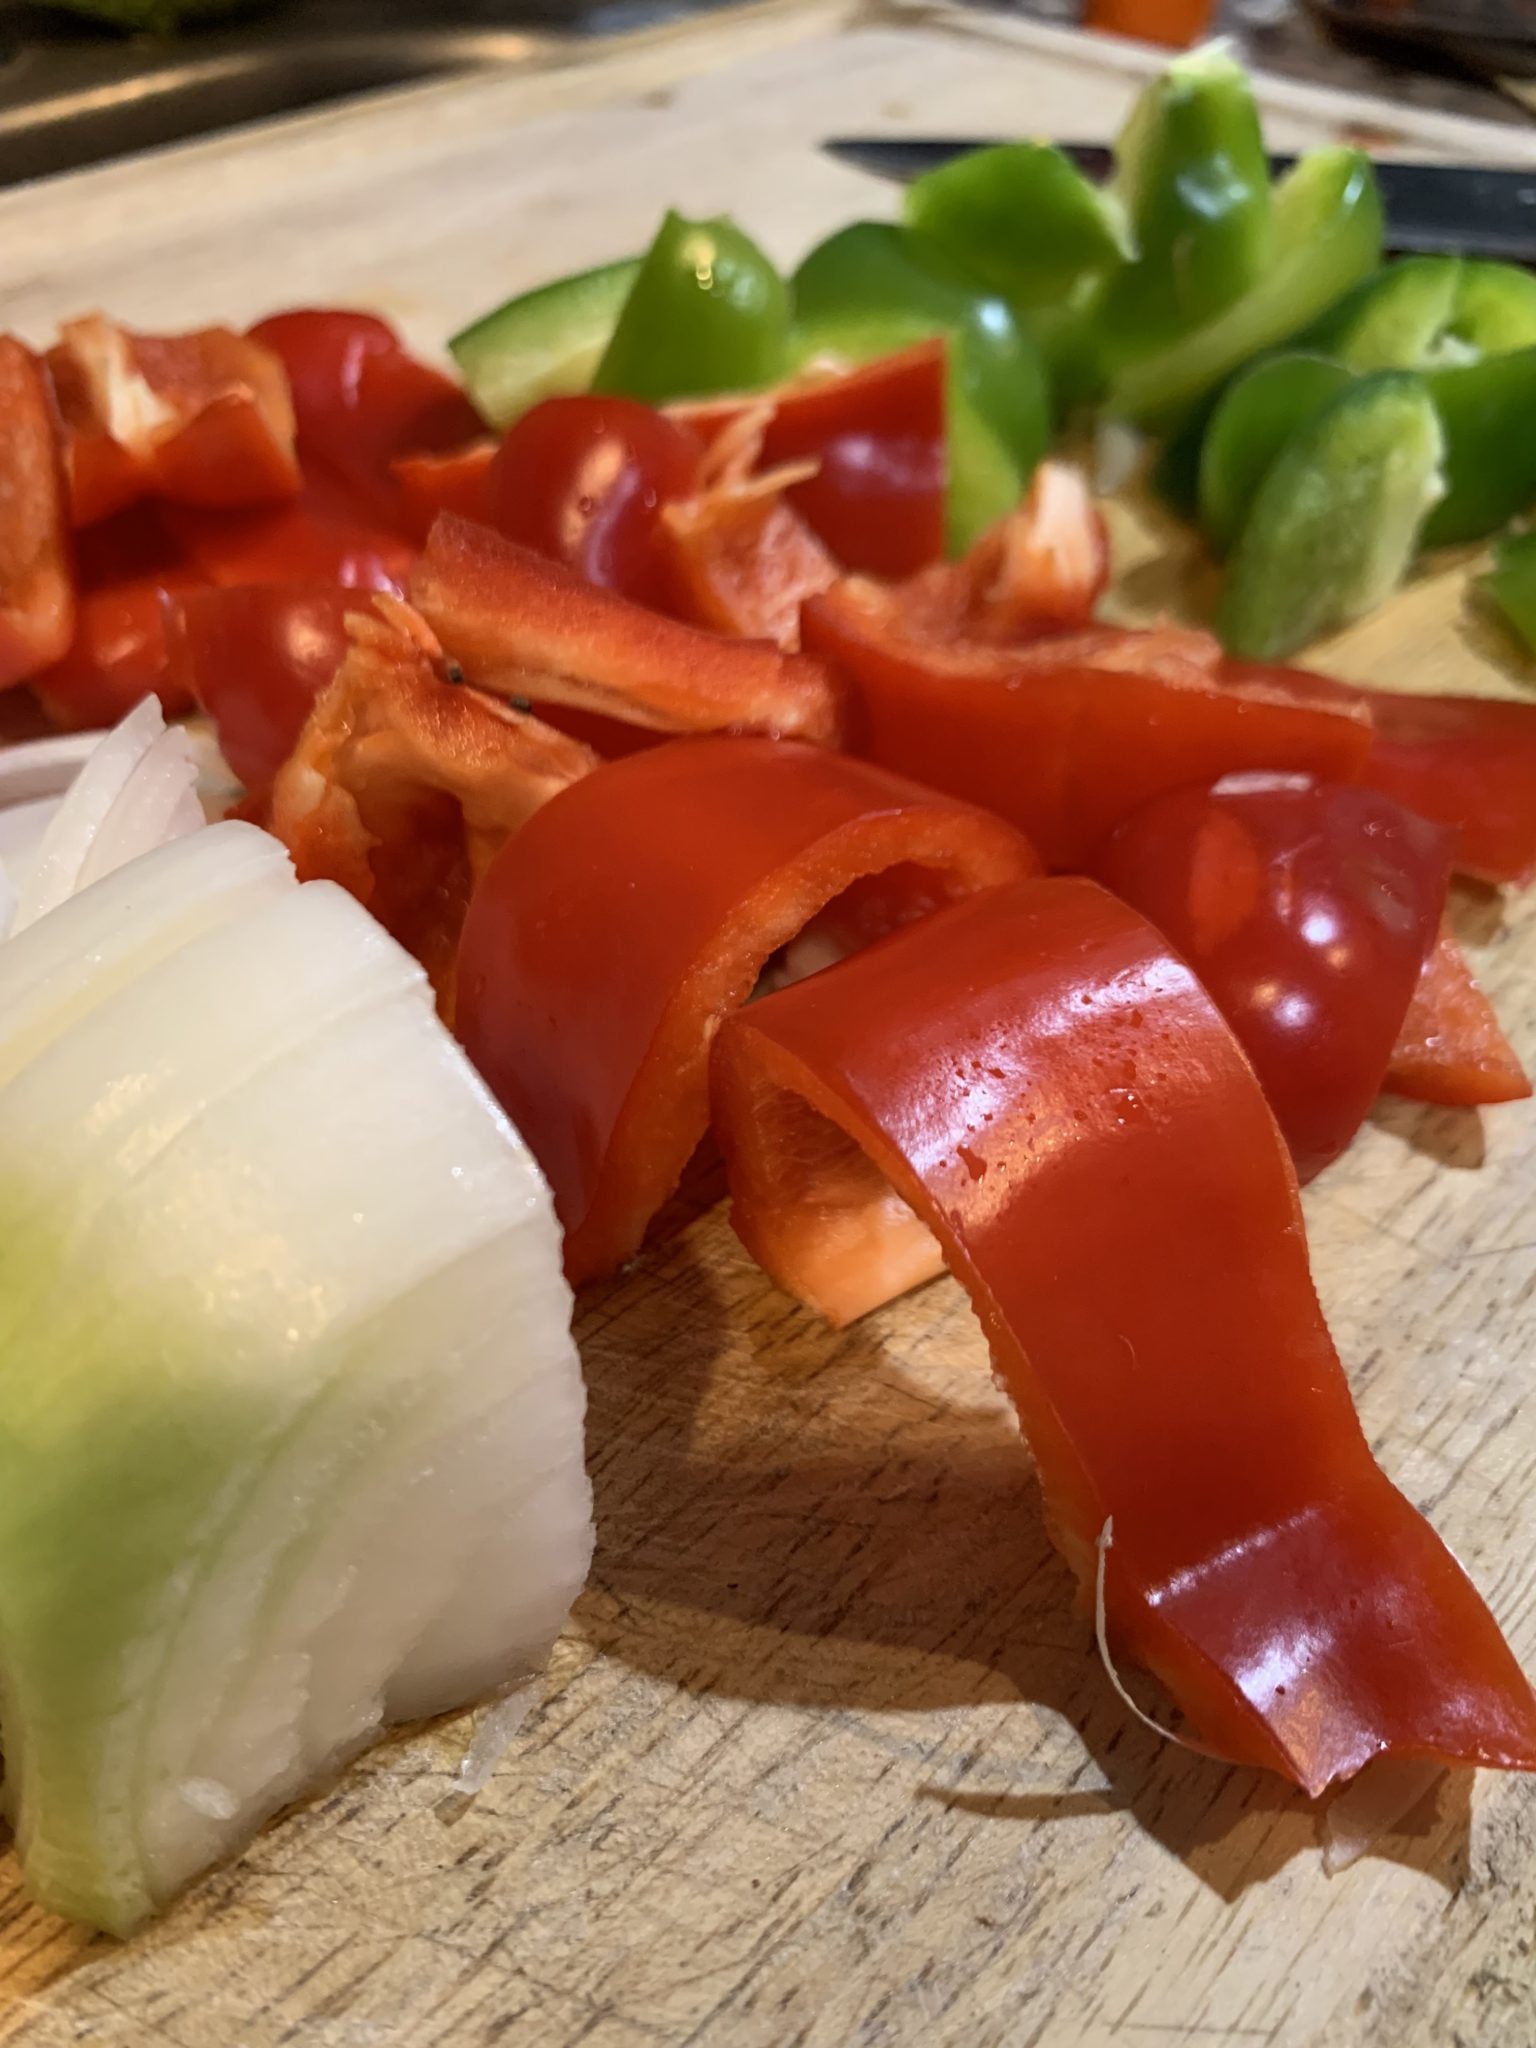 Picture of chopped onions, red peppers and green peppers.